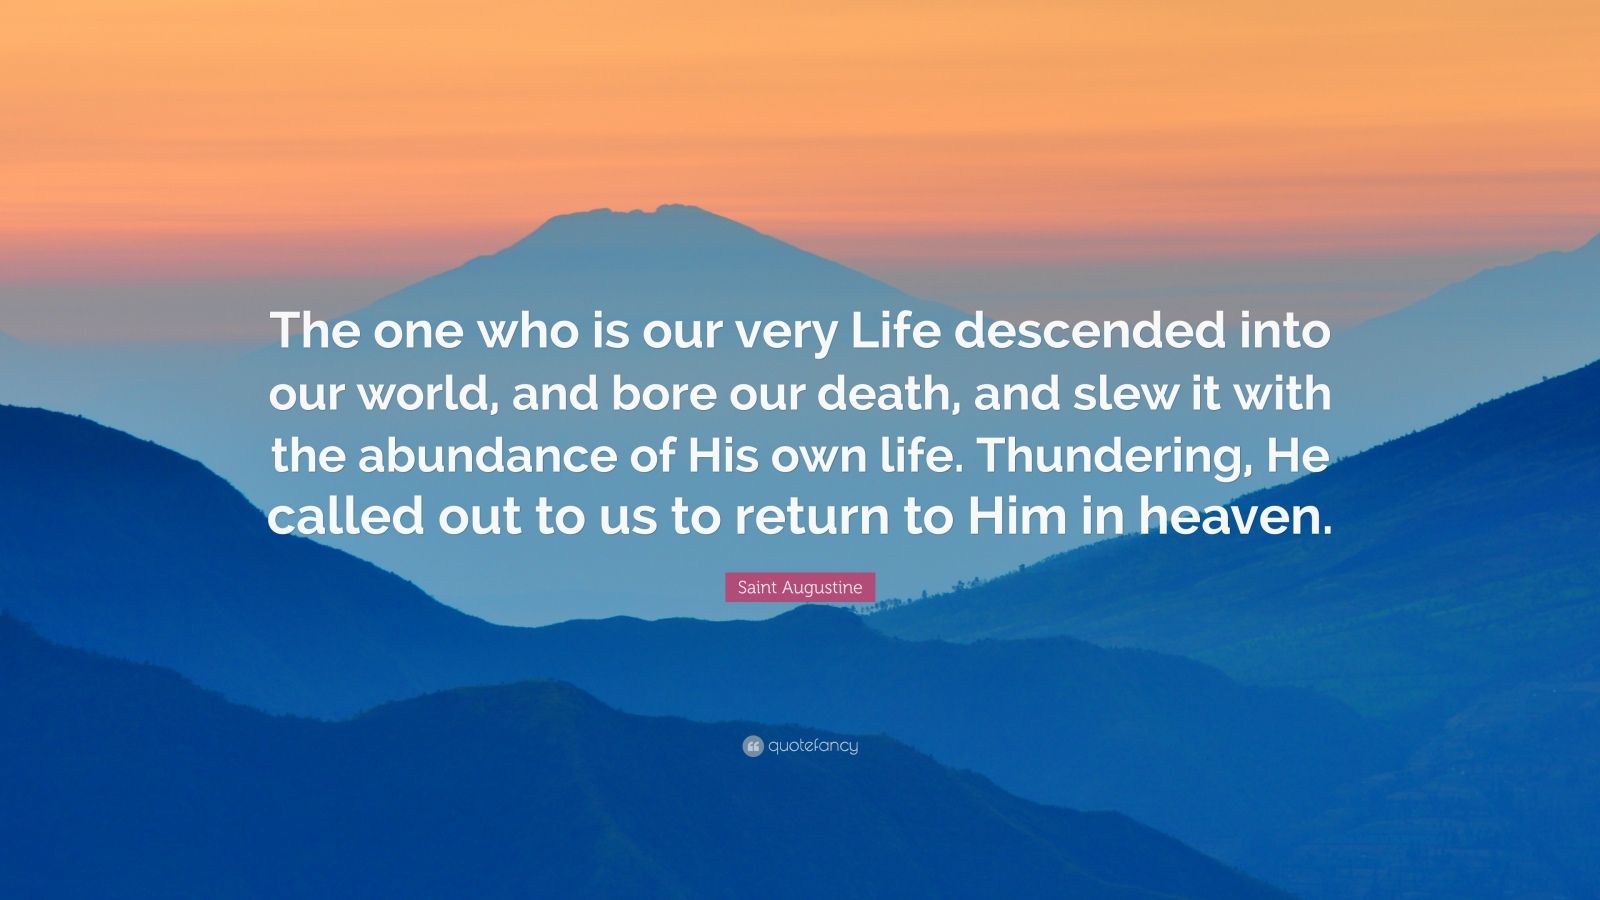 Saint Augustine Quote: “The one who is our very Life descended into our